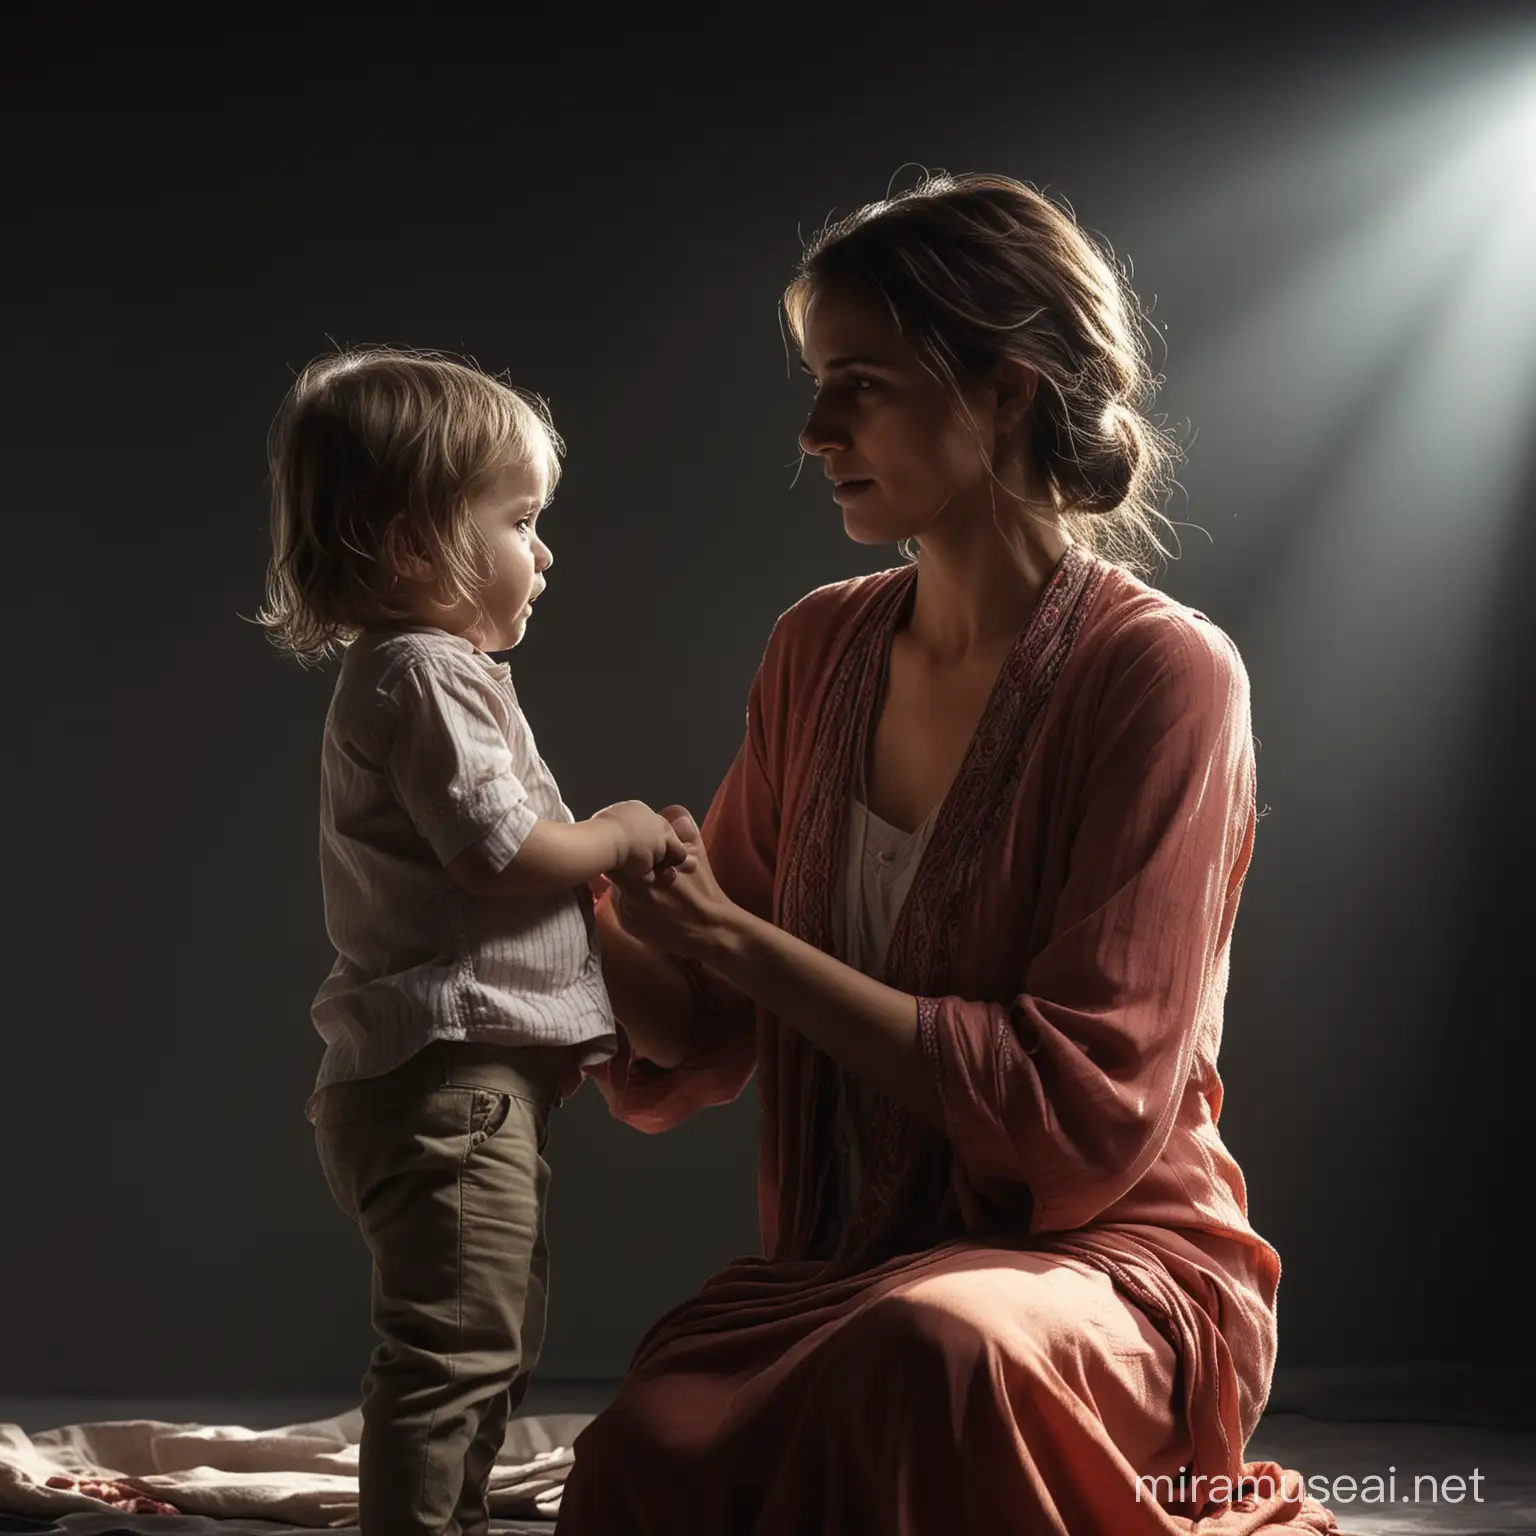 a mother selling by her child in flowing clothes, HD, dramatic lighting, details